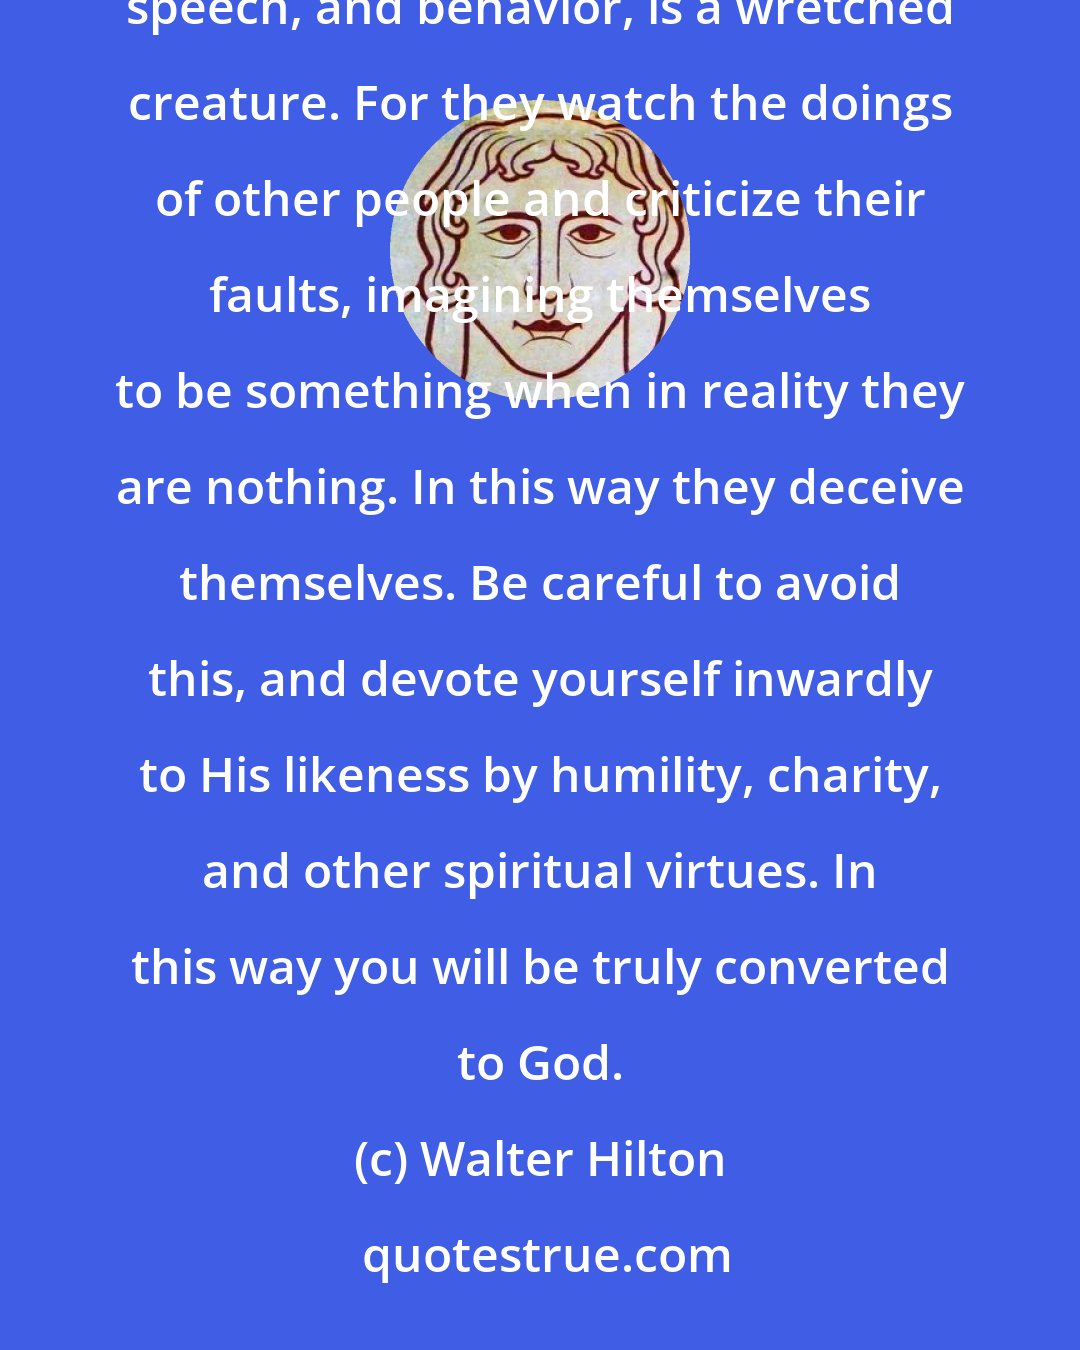 Walter Hilton: Any man or woman who neglects to maintain inward vigilance, and only makes an outward show of holiness in dress, speech, and behavior, is a wretched creature. For they watch the doings of other people and criticize their faults, imagining themselves to be something when in reality they are nothing. In this way they deceive themselves. Be careful to avoid this, and devote yourself inwardly to His likeness by humility, charity, and other spiritual virtues. In this way you will be truly converted to God.